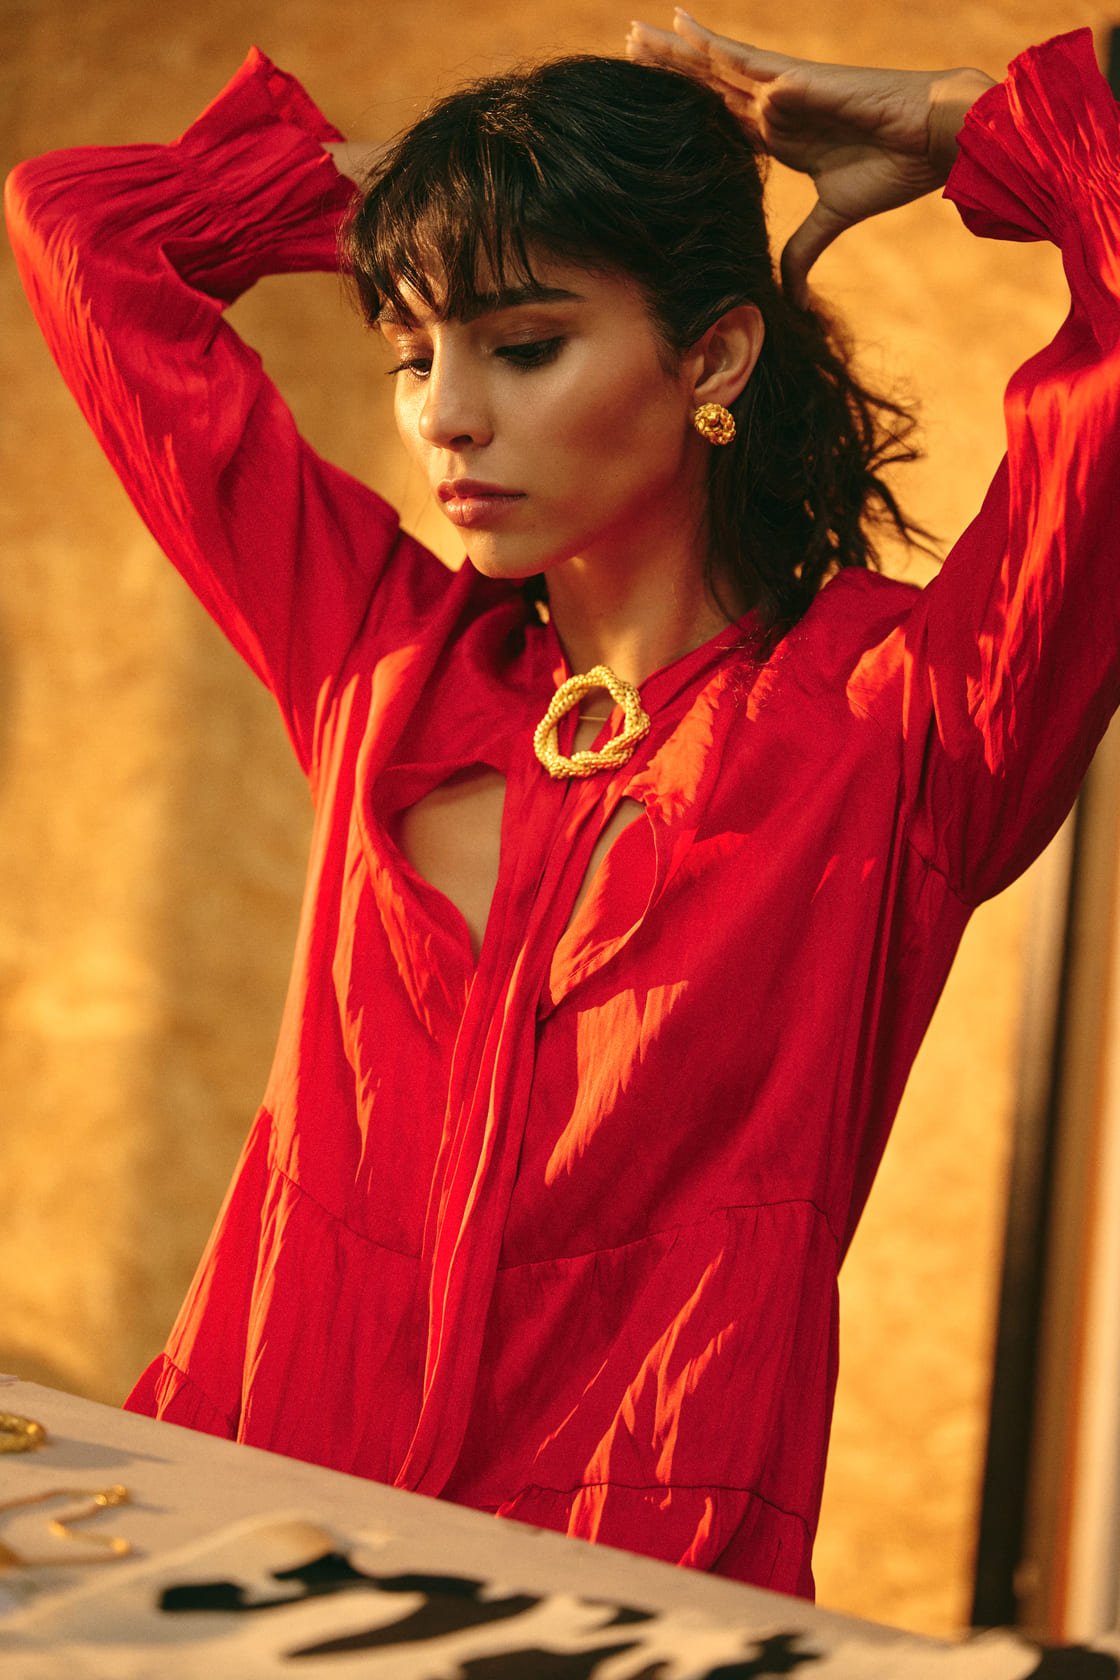 Image of a woman wearing gold earrings and a matching pin. She's also wearing a red dress and seems to be getting ready, putting her hair back. The purpose of this image is to highlight the earrings by Alma jewelry.